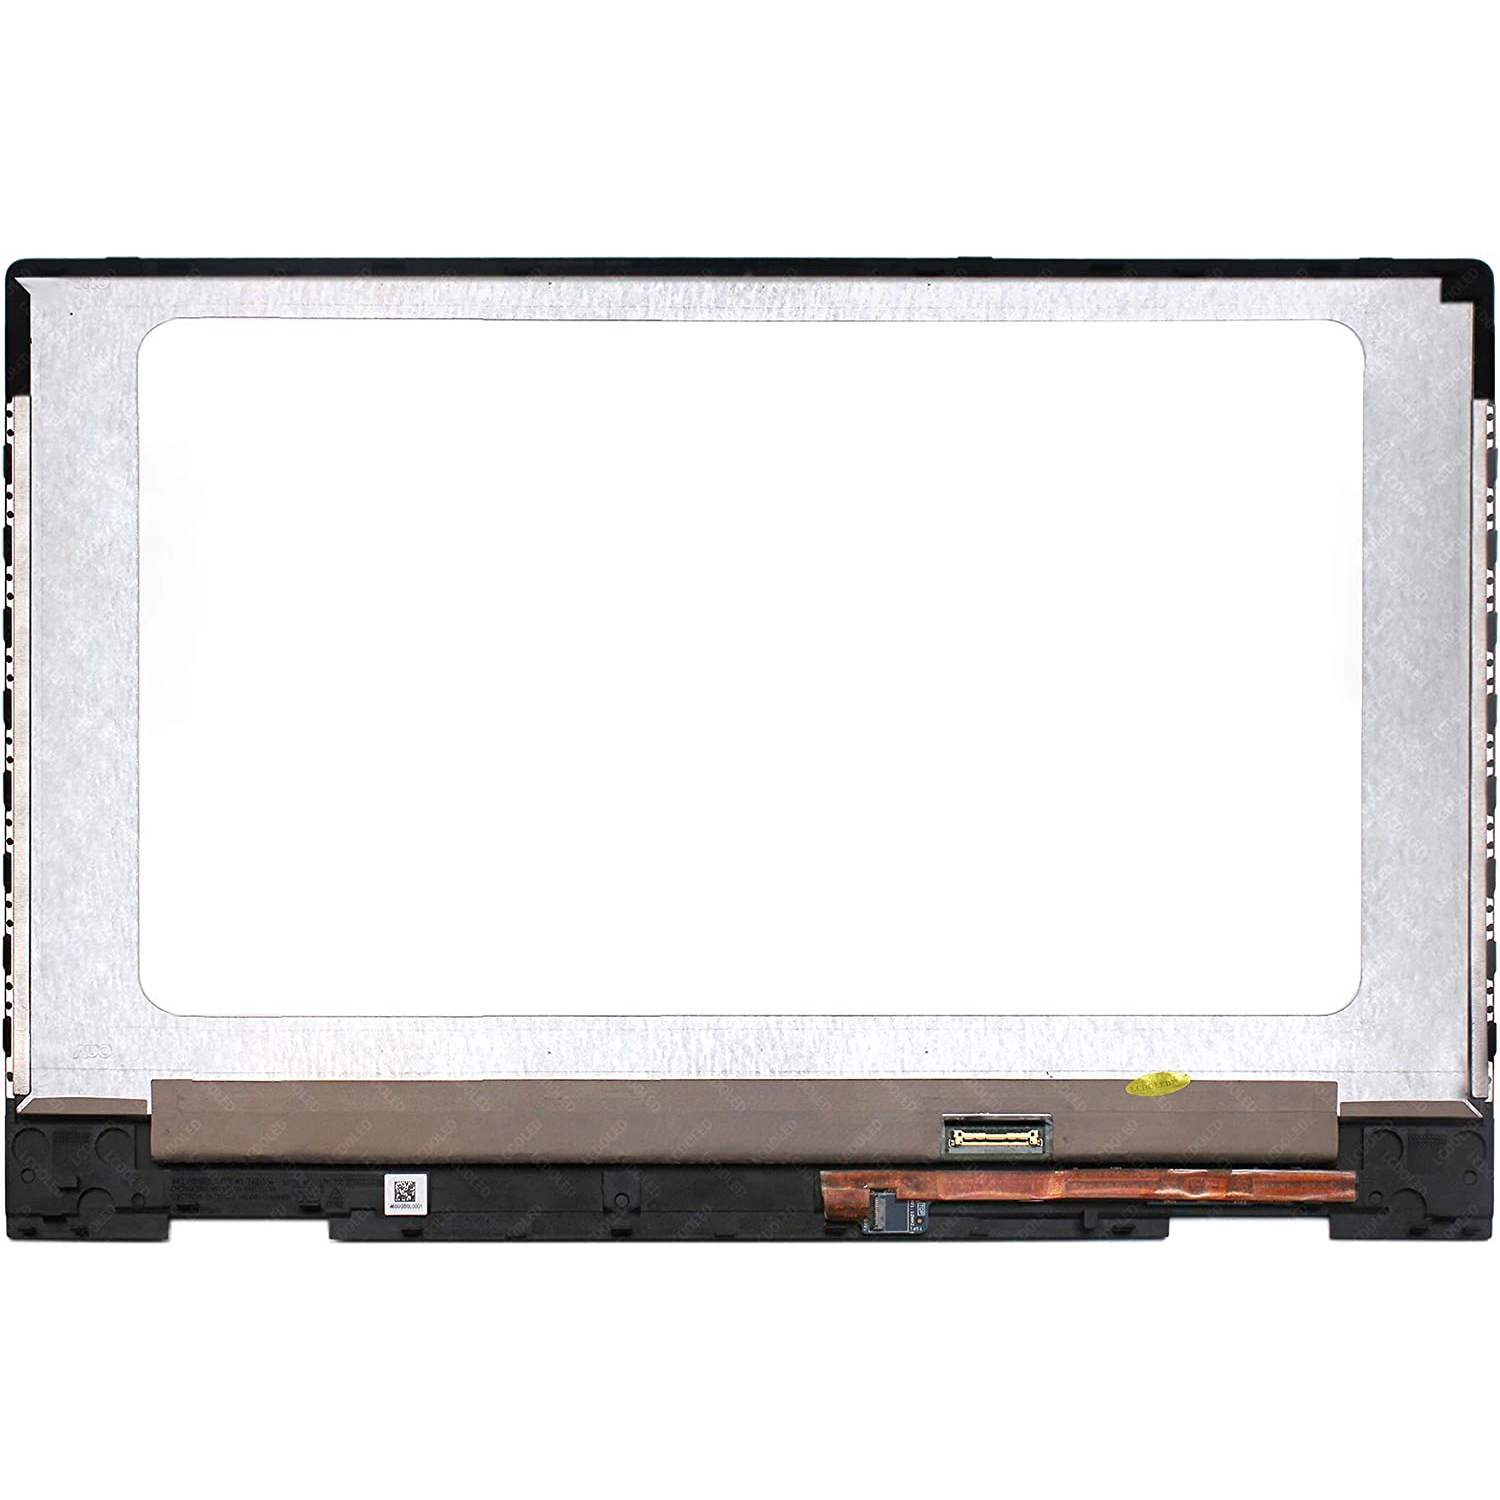 Laptopking Replacement screen for HP Envy x360 15-ds1003ca 15-ds1010nr 15-ds1010wm Touch Screen Digitizer Assembly FullHD 1920x1080 IPS LCD Display